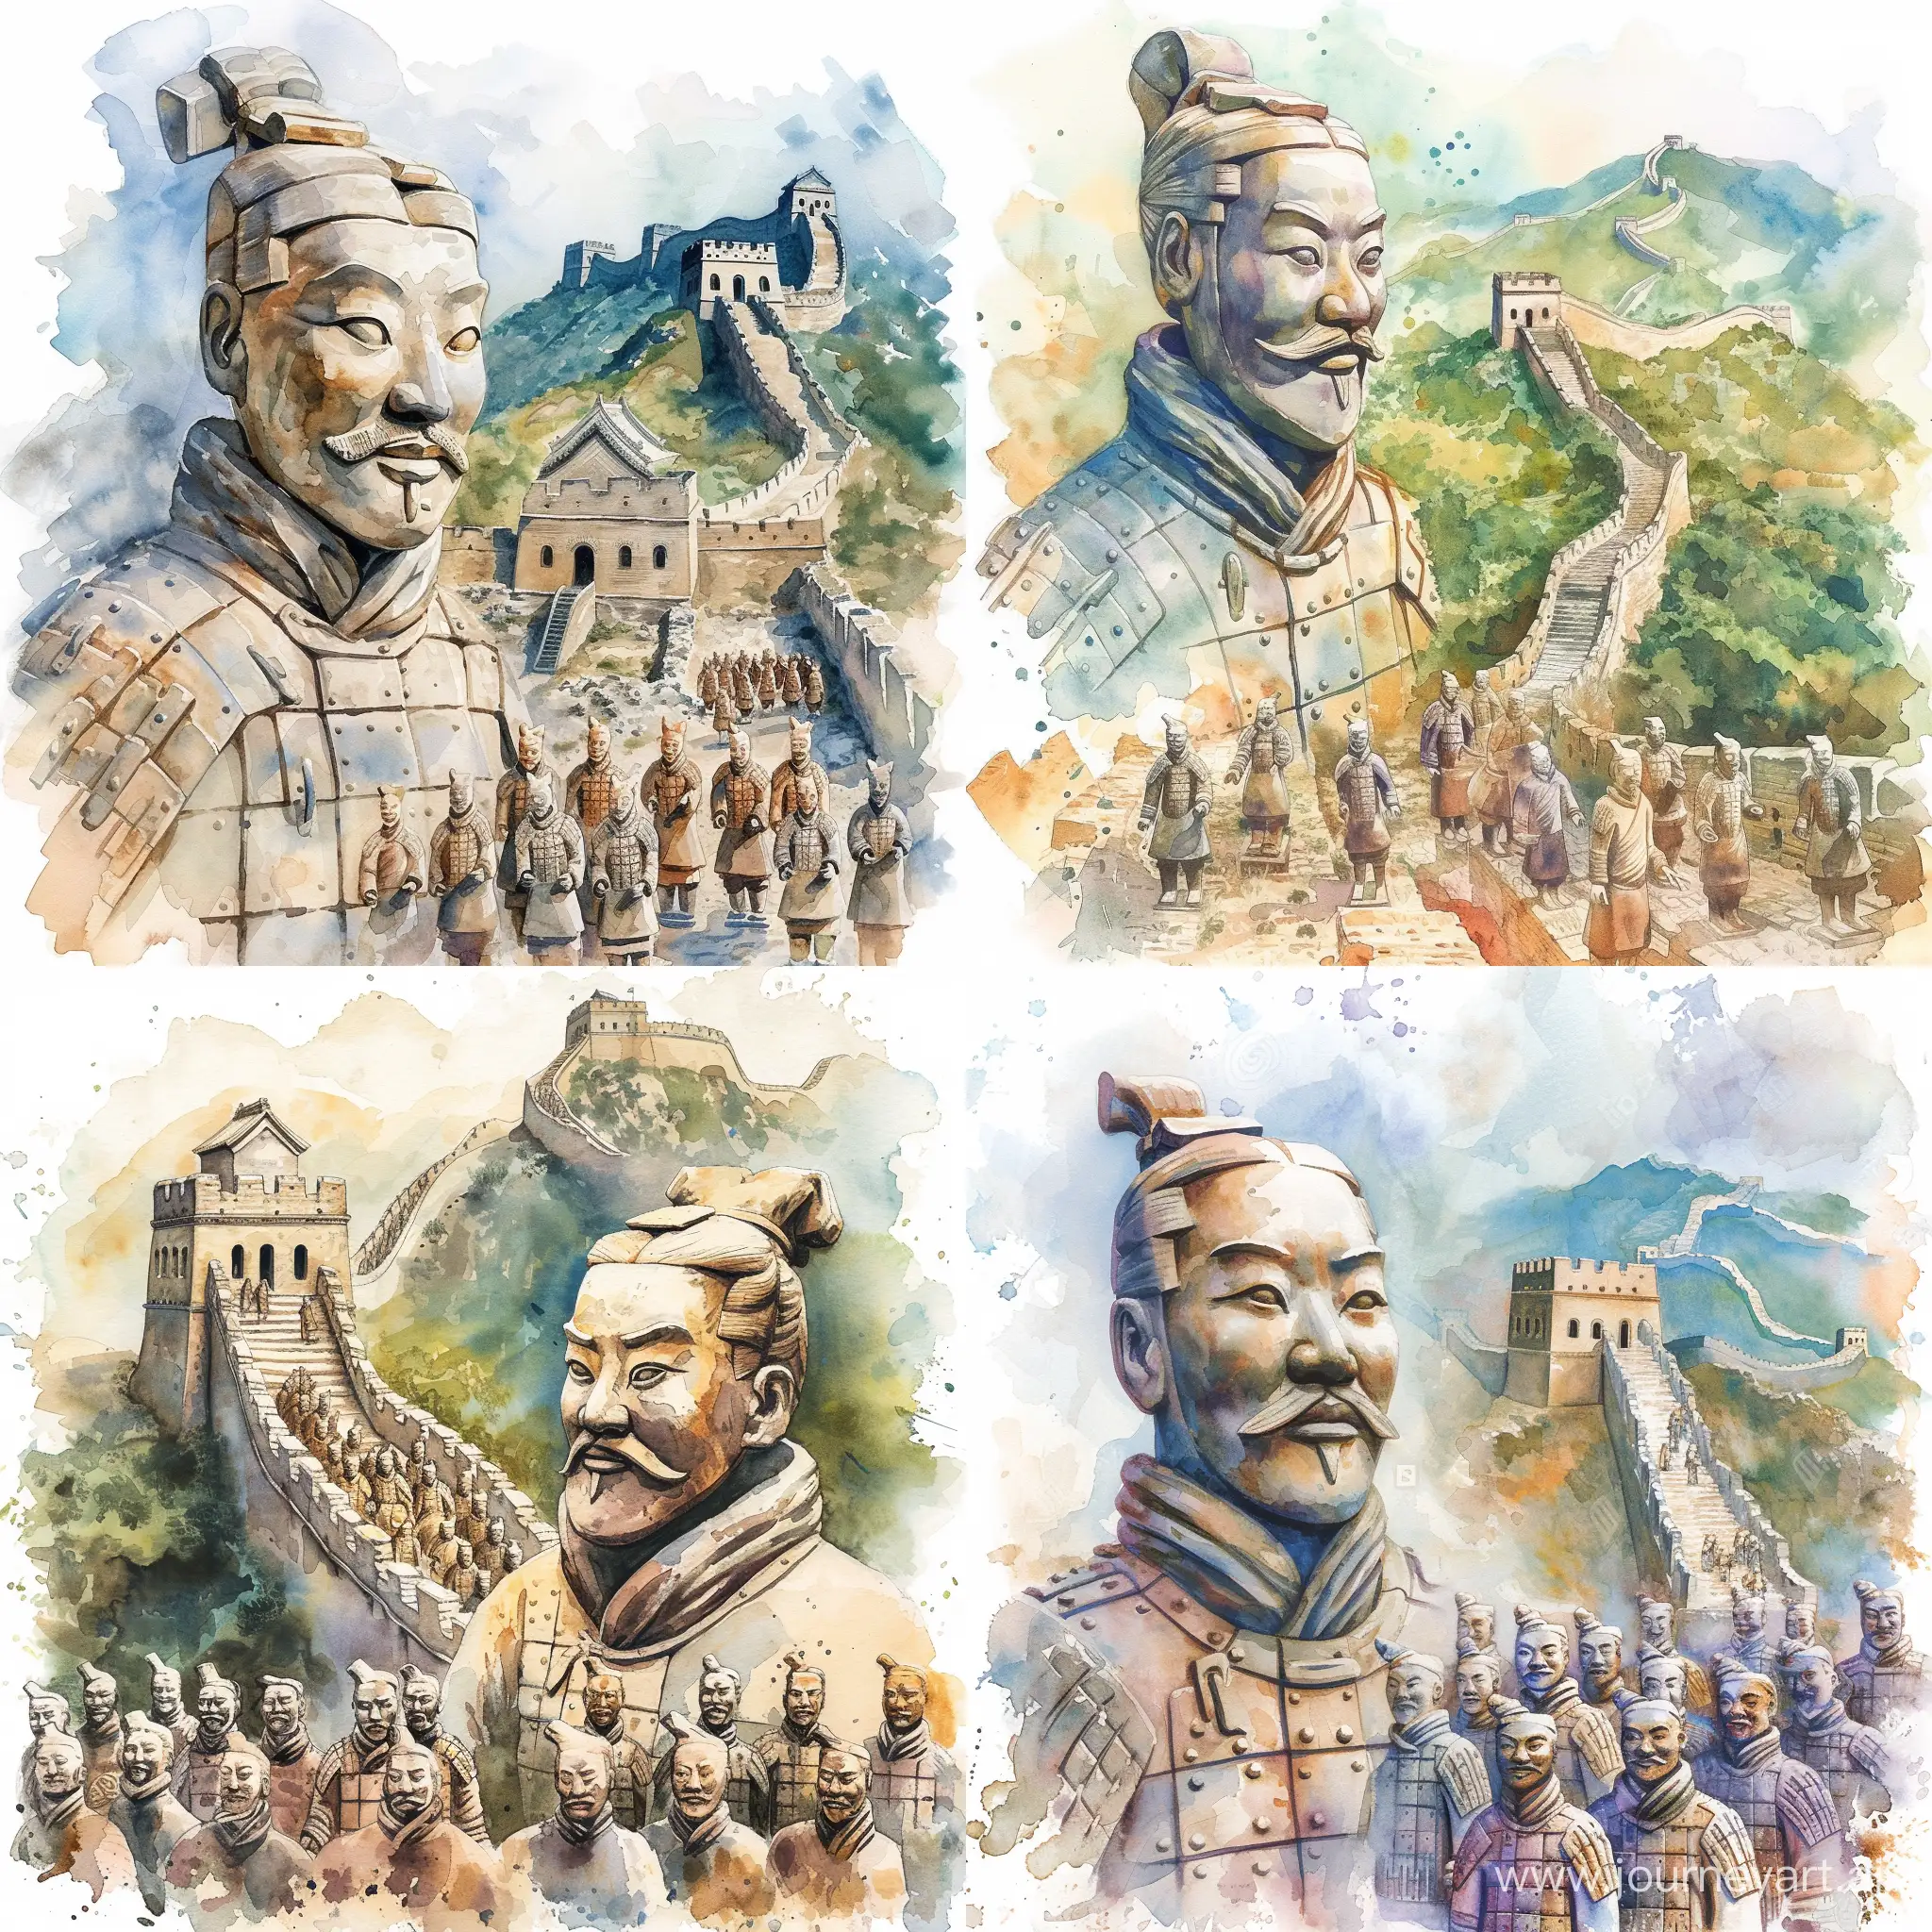 Let your imagination run wild with a creative watercolor depiction of Qin Shi Huang, showcasing his legendary army of terracotta warriors and the majestic Great Wall of China.